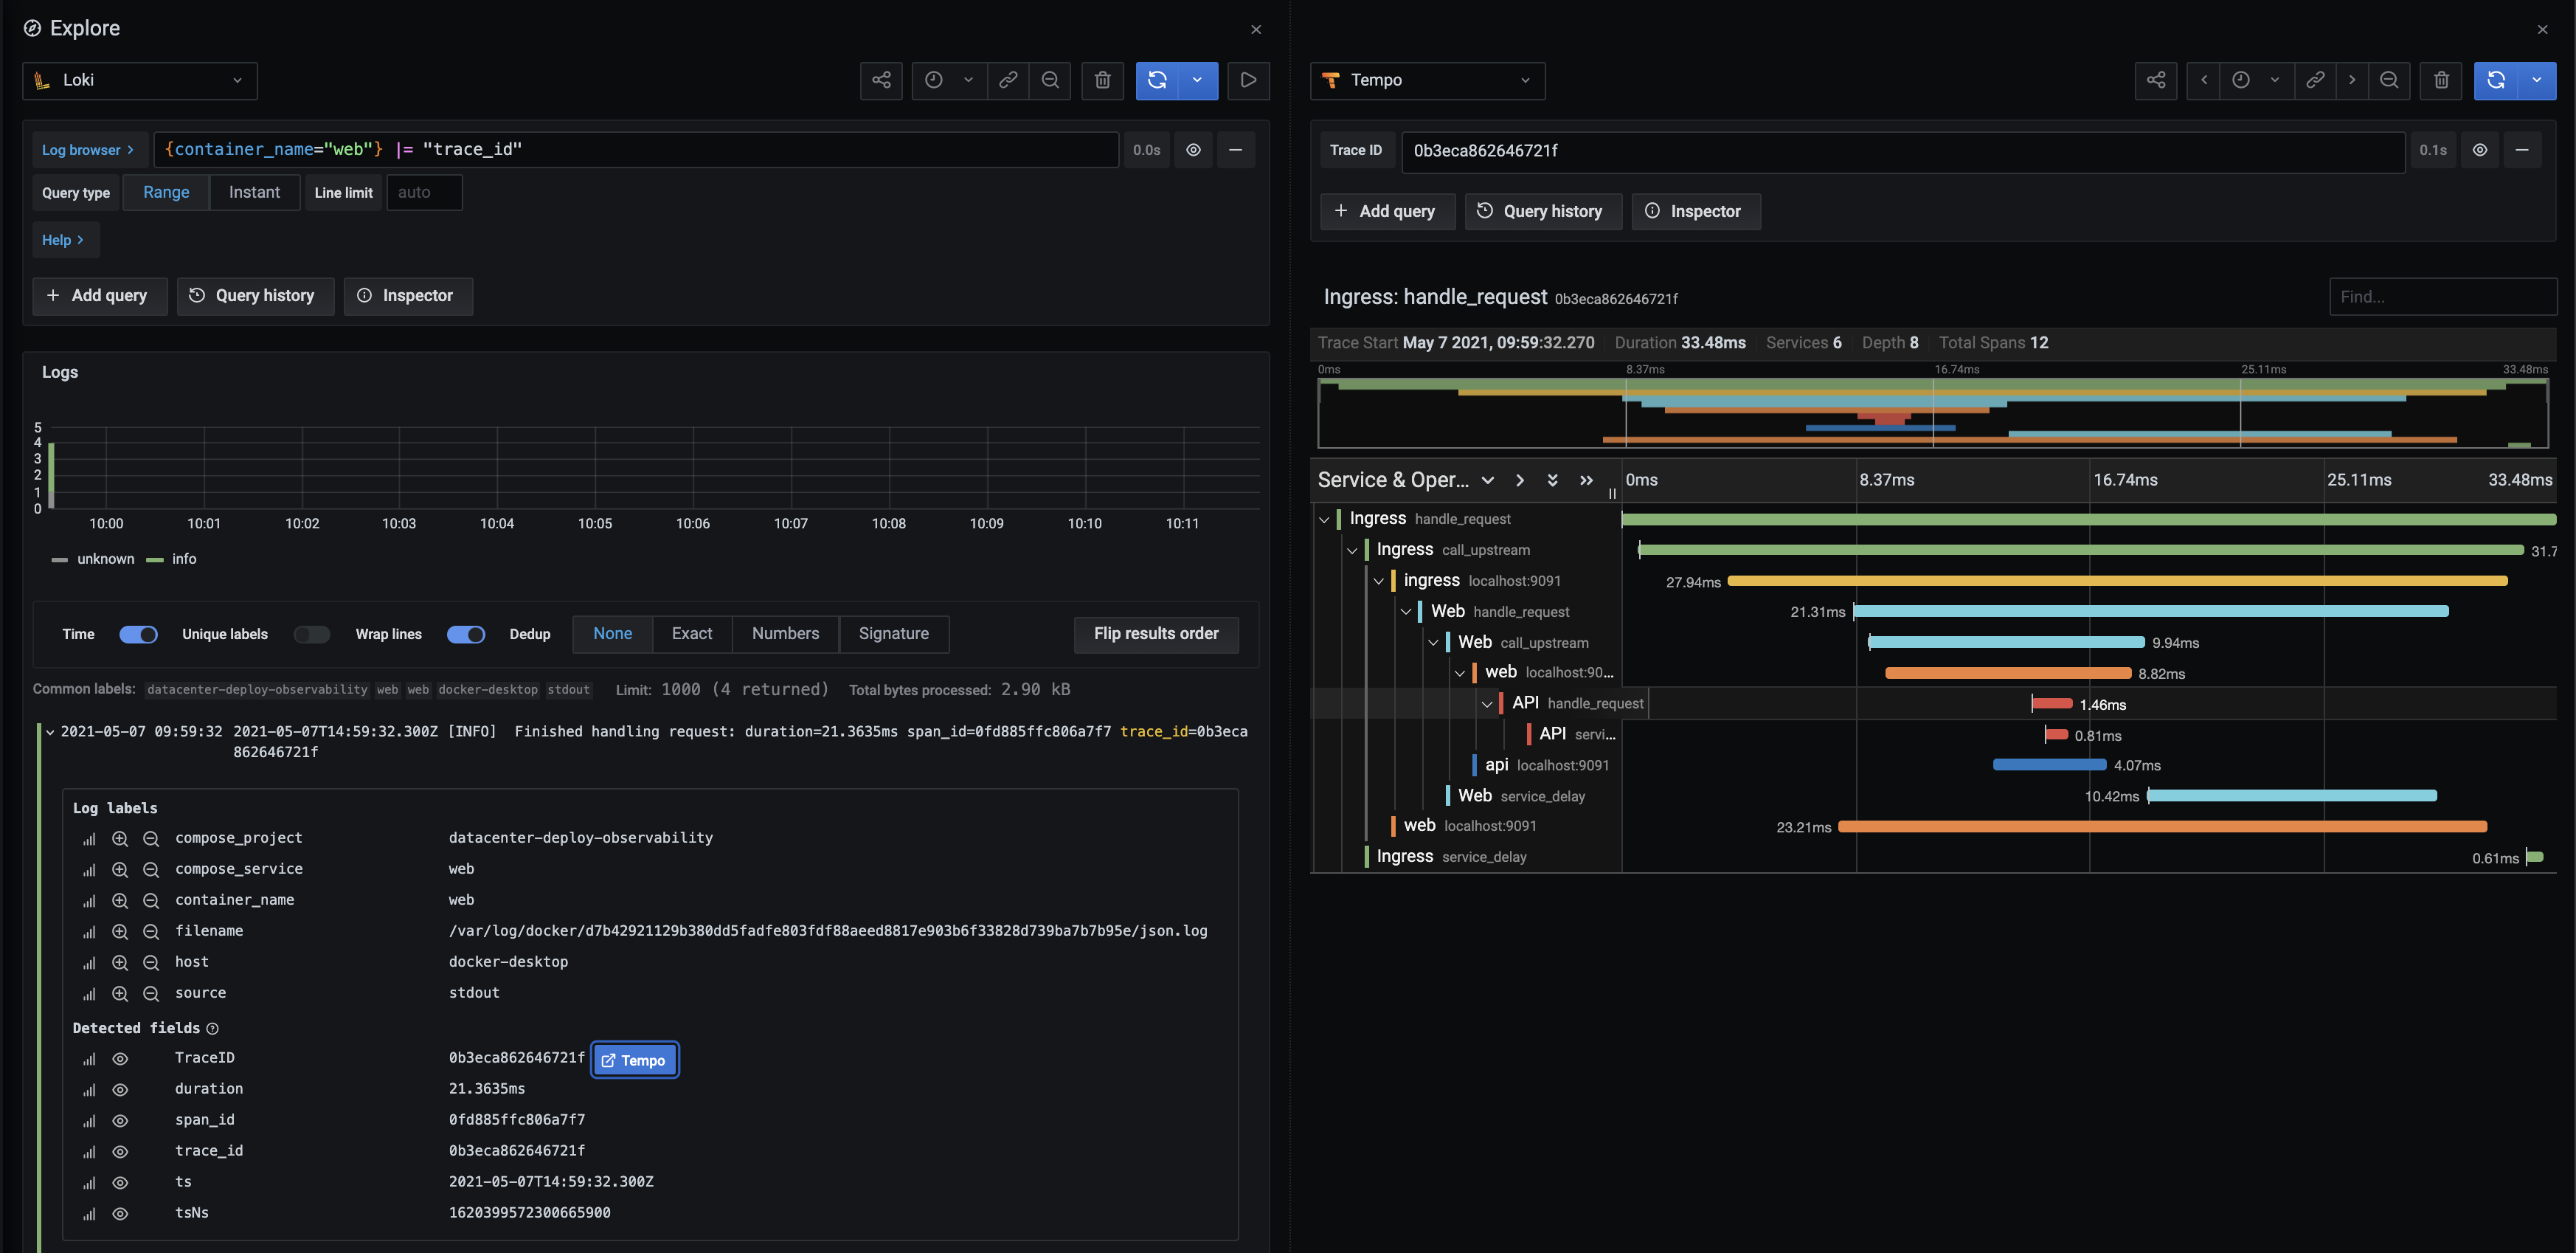 Image of linked logs and traces in Grafana UI.